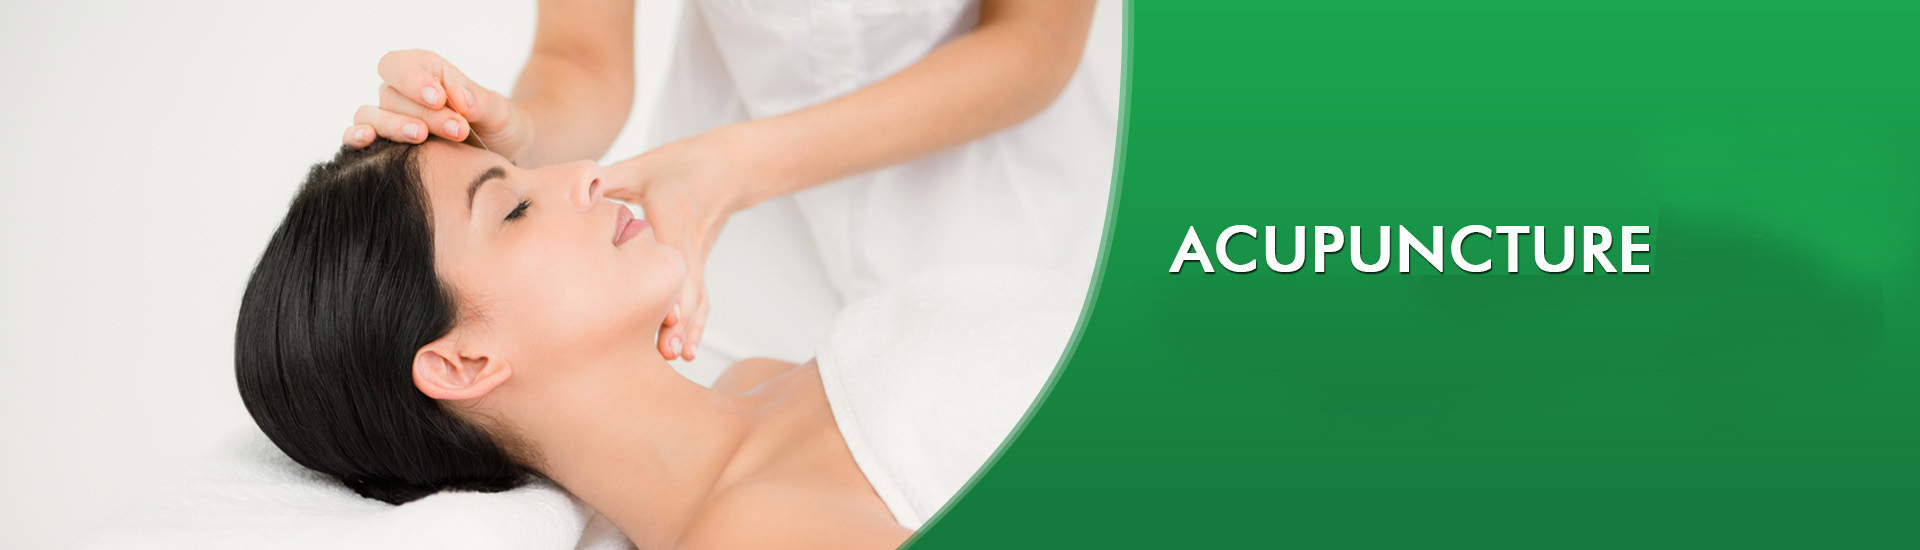 Acupuncture Clinic in Chennai